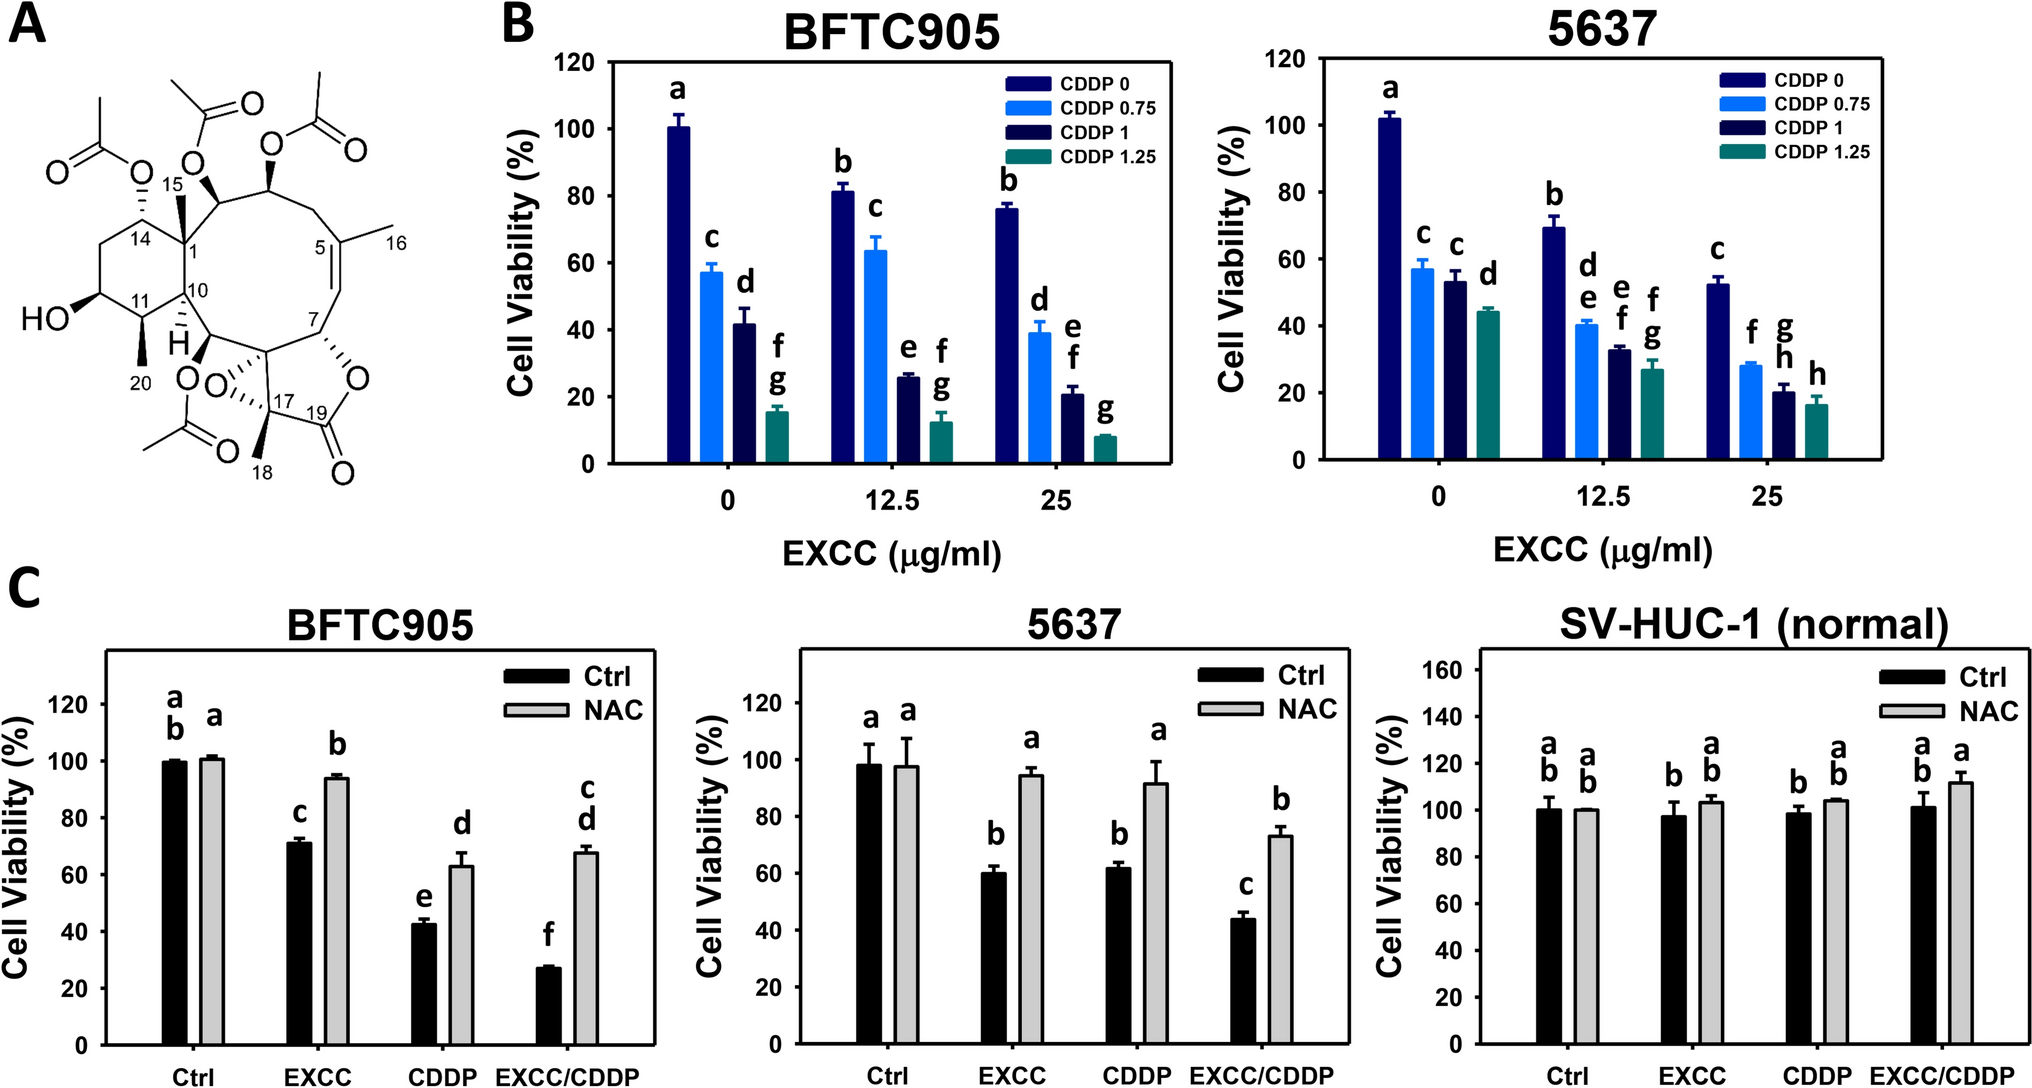 Excavatolide C/cisplatin combination induces antiproliferation and drives apoptosis and DNA damage in bladder cancer cells